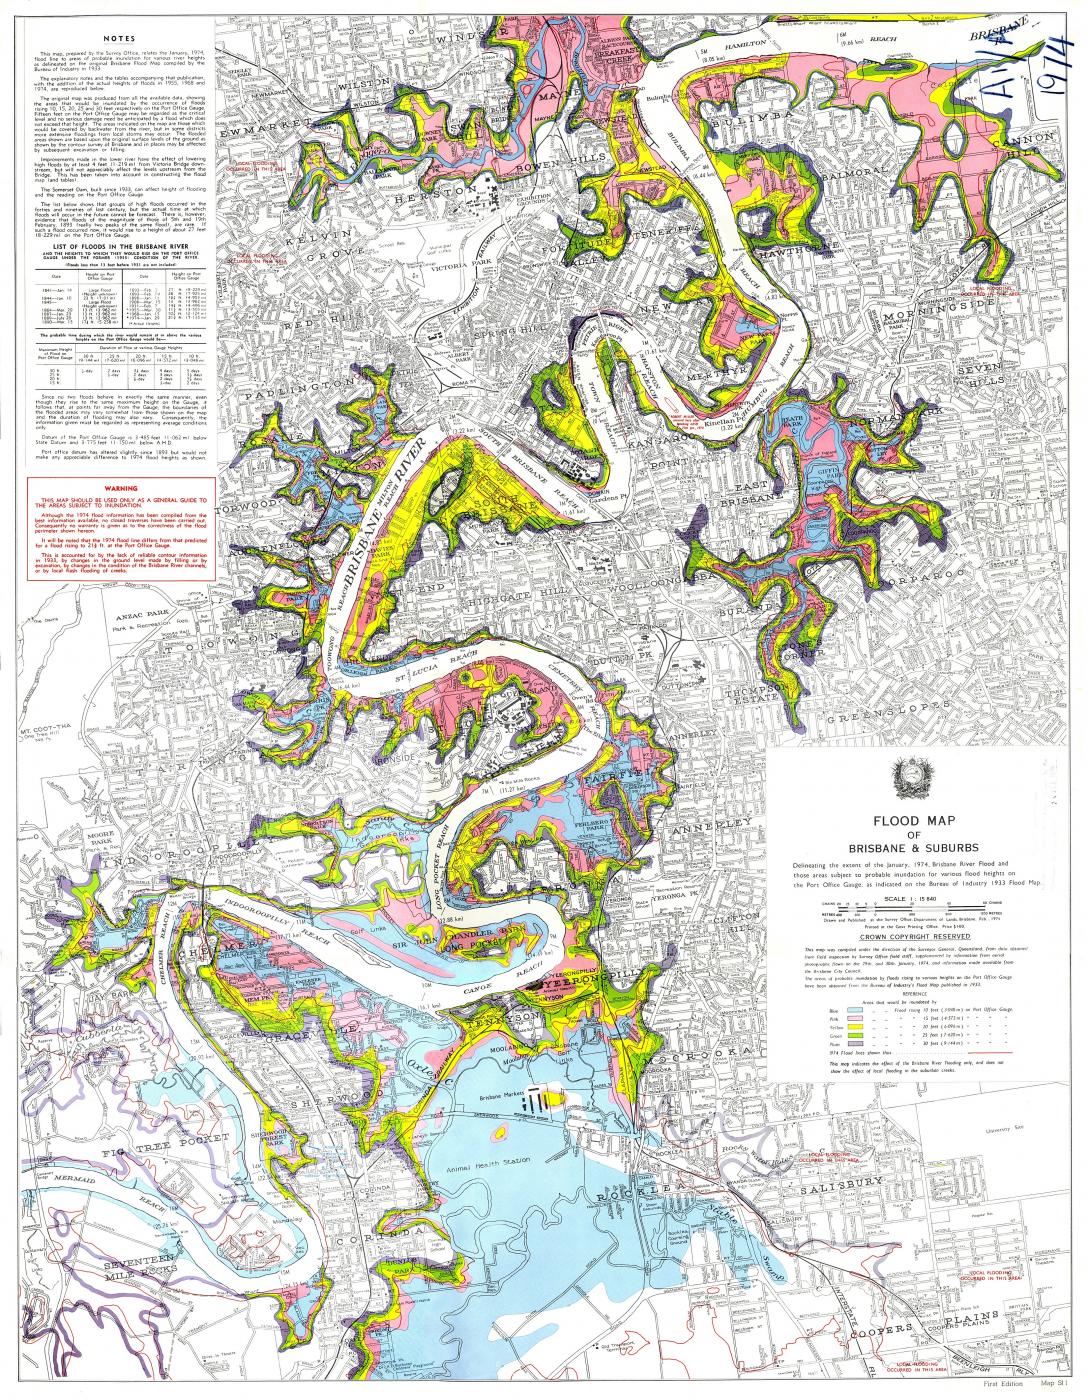 Flood map of Brisbane and suburbs, delineating the extent of the January 1974 Brisbane River flood